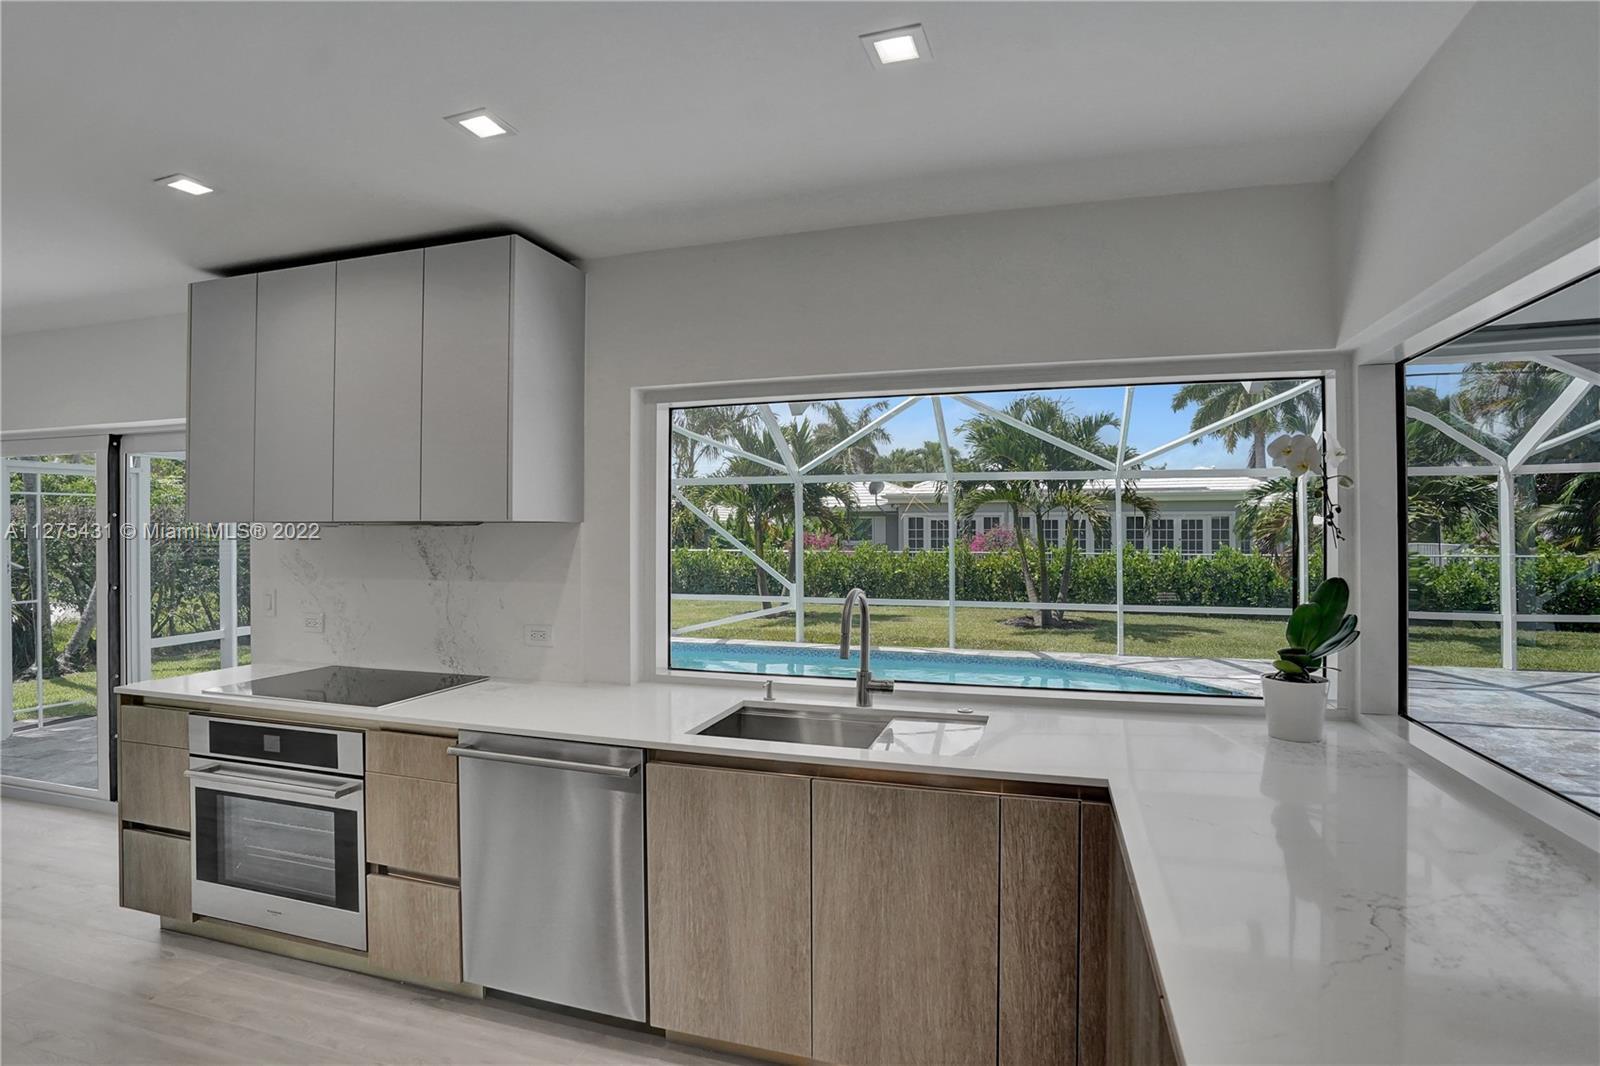 Fantastic opportunity to live an exquisite life in one of the best Boca neighborhoods, Camino Garden